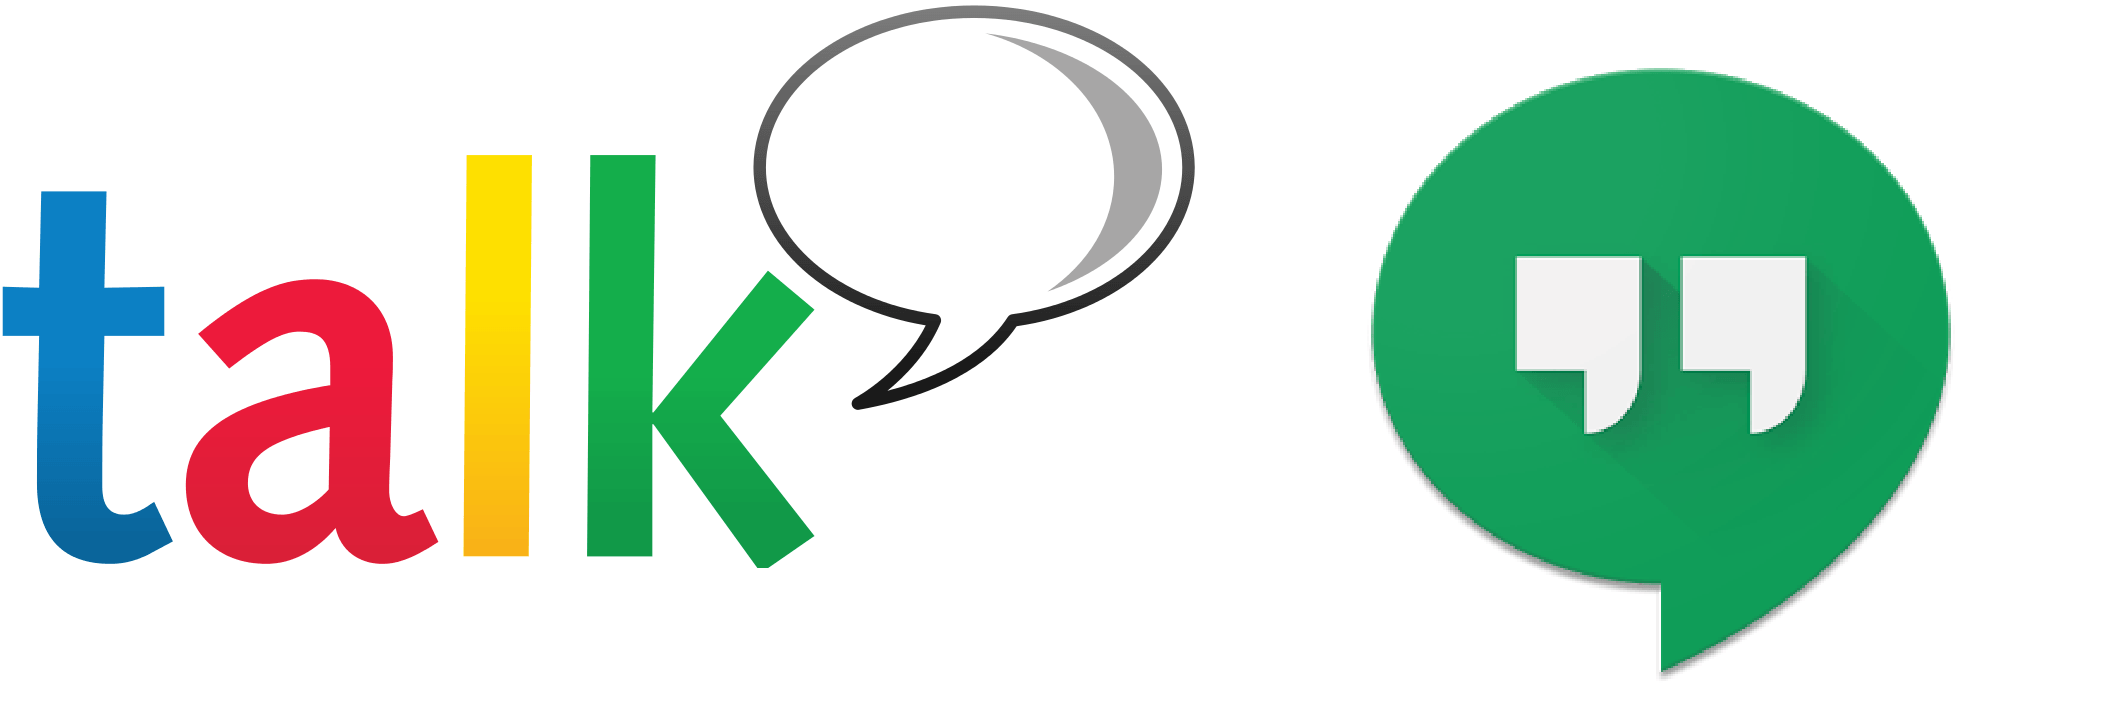 Gchat Logo - Google Kills Off Gtalk(Chat) Officially To Move On Hangouts